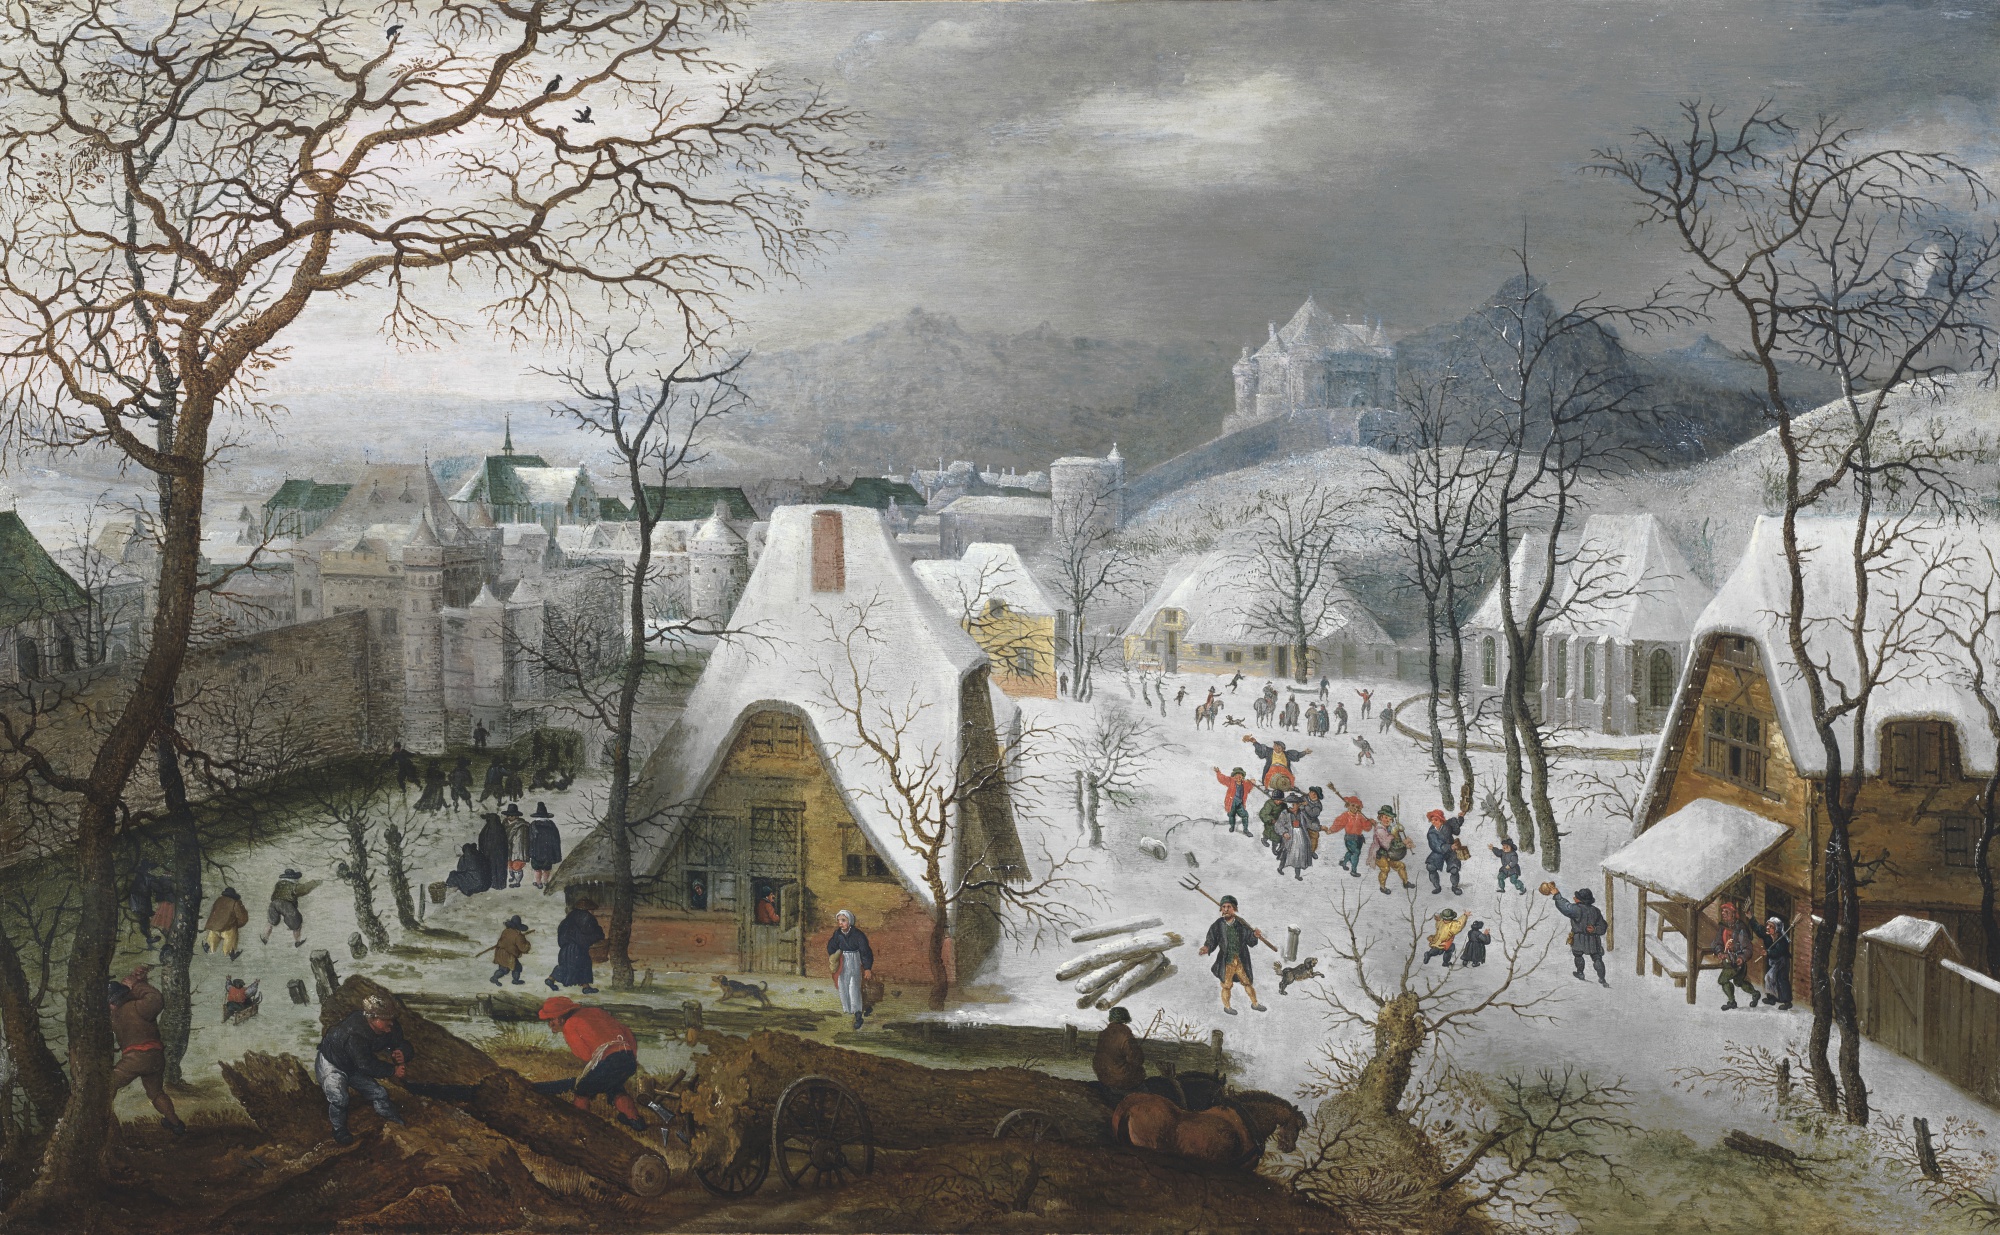 Jacob_Savery_I_-_Winter_landscape_with_a_wedding_procession_and_figures.jpg